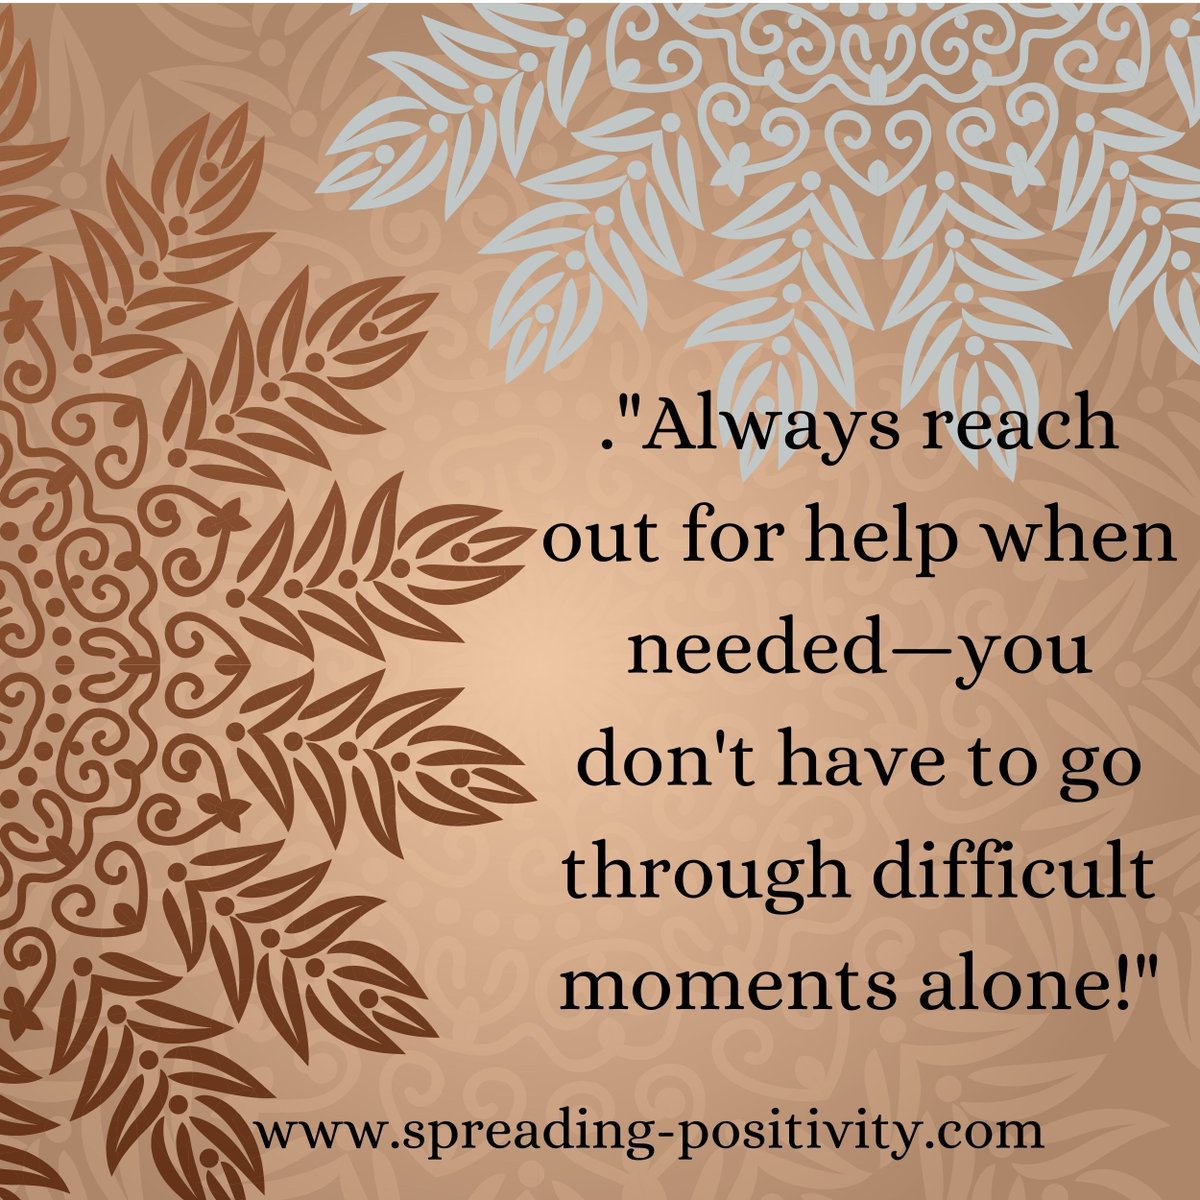 When the going gets tough, remember that it's okay to ask for help. 🤝✨Life can bring challenges, but these challenges don't have to be faced alone. Reaching out for help is not a sign of weakness,

 #SpreadingPositivity #ReachOut #YouAreNotAlone #StrengthInUnity #Hope